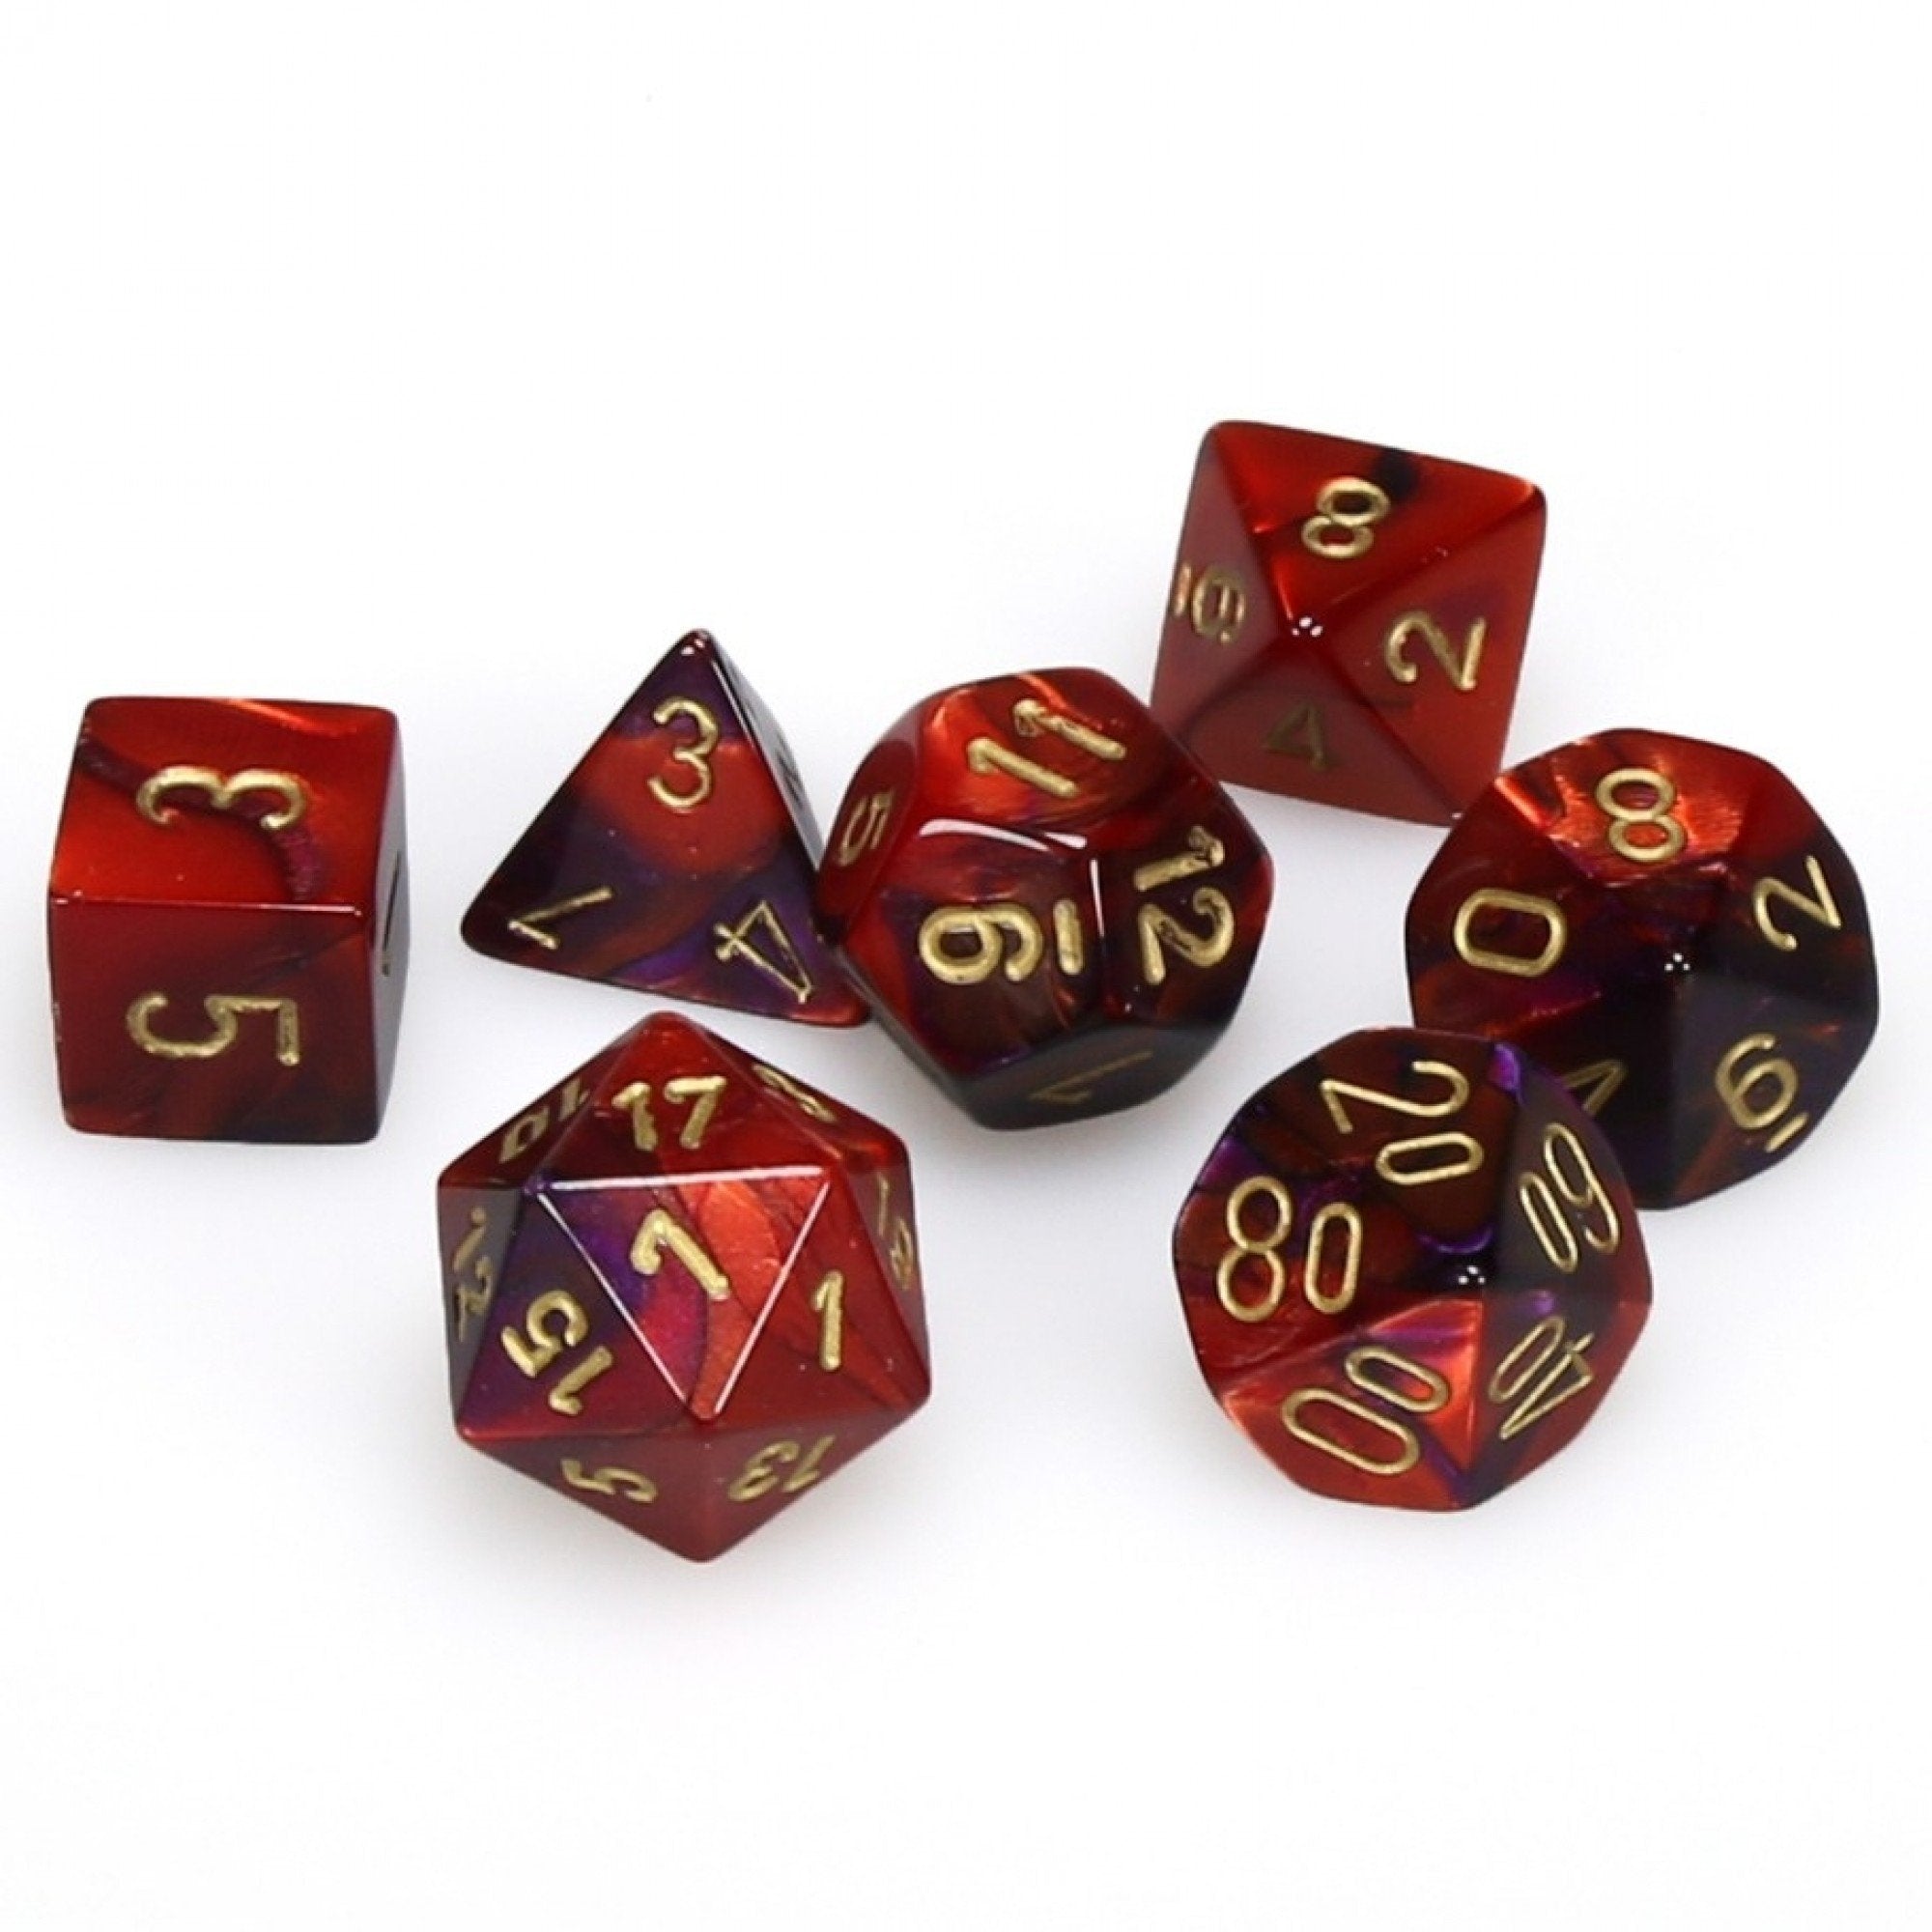 Chessex Gemini™ Polyhedral 7pcs Dice (Purple-Red/Gold) [CHX26426]-Chessex-Ace Cards & Collectibles